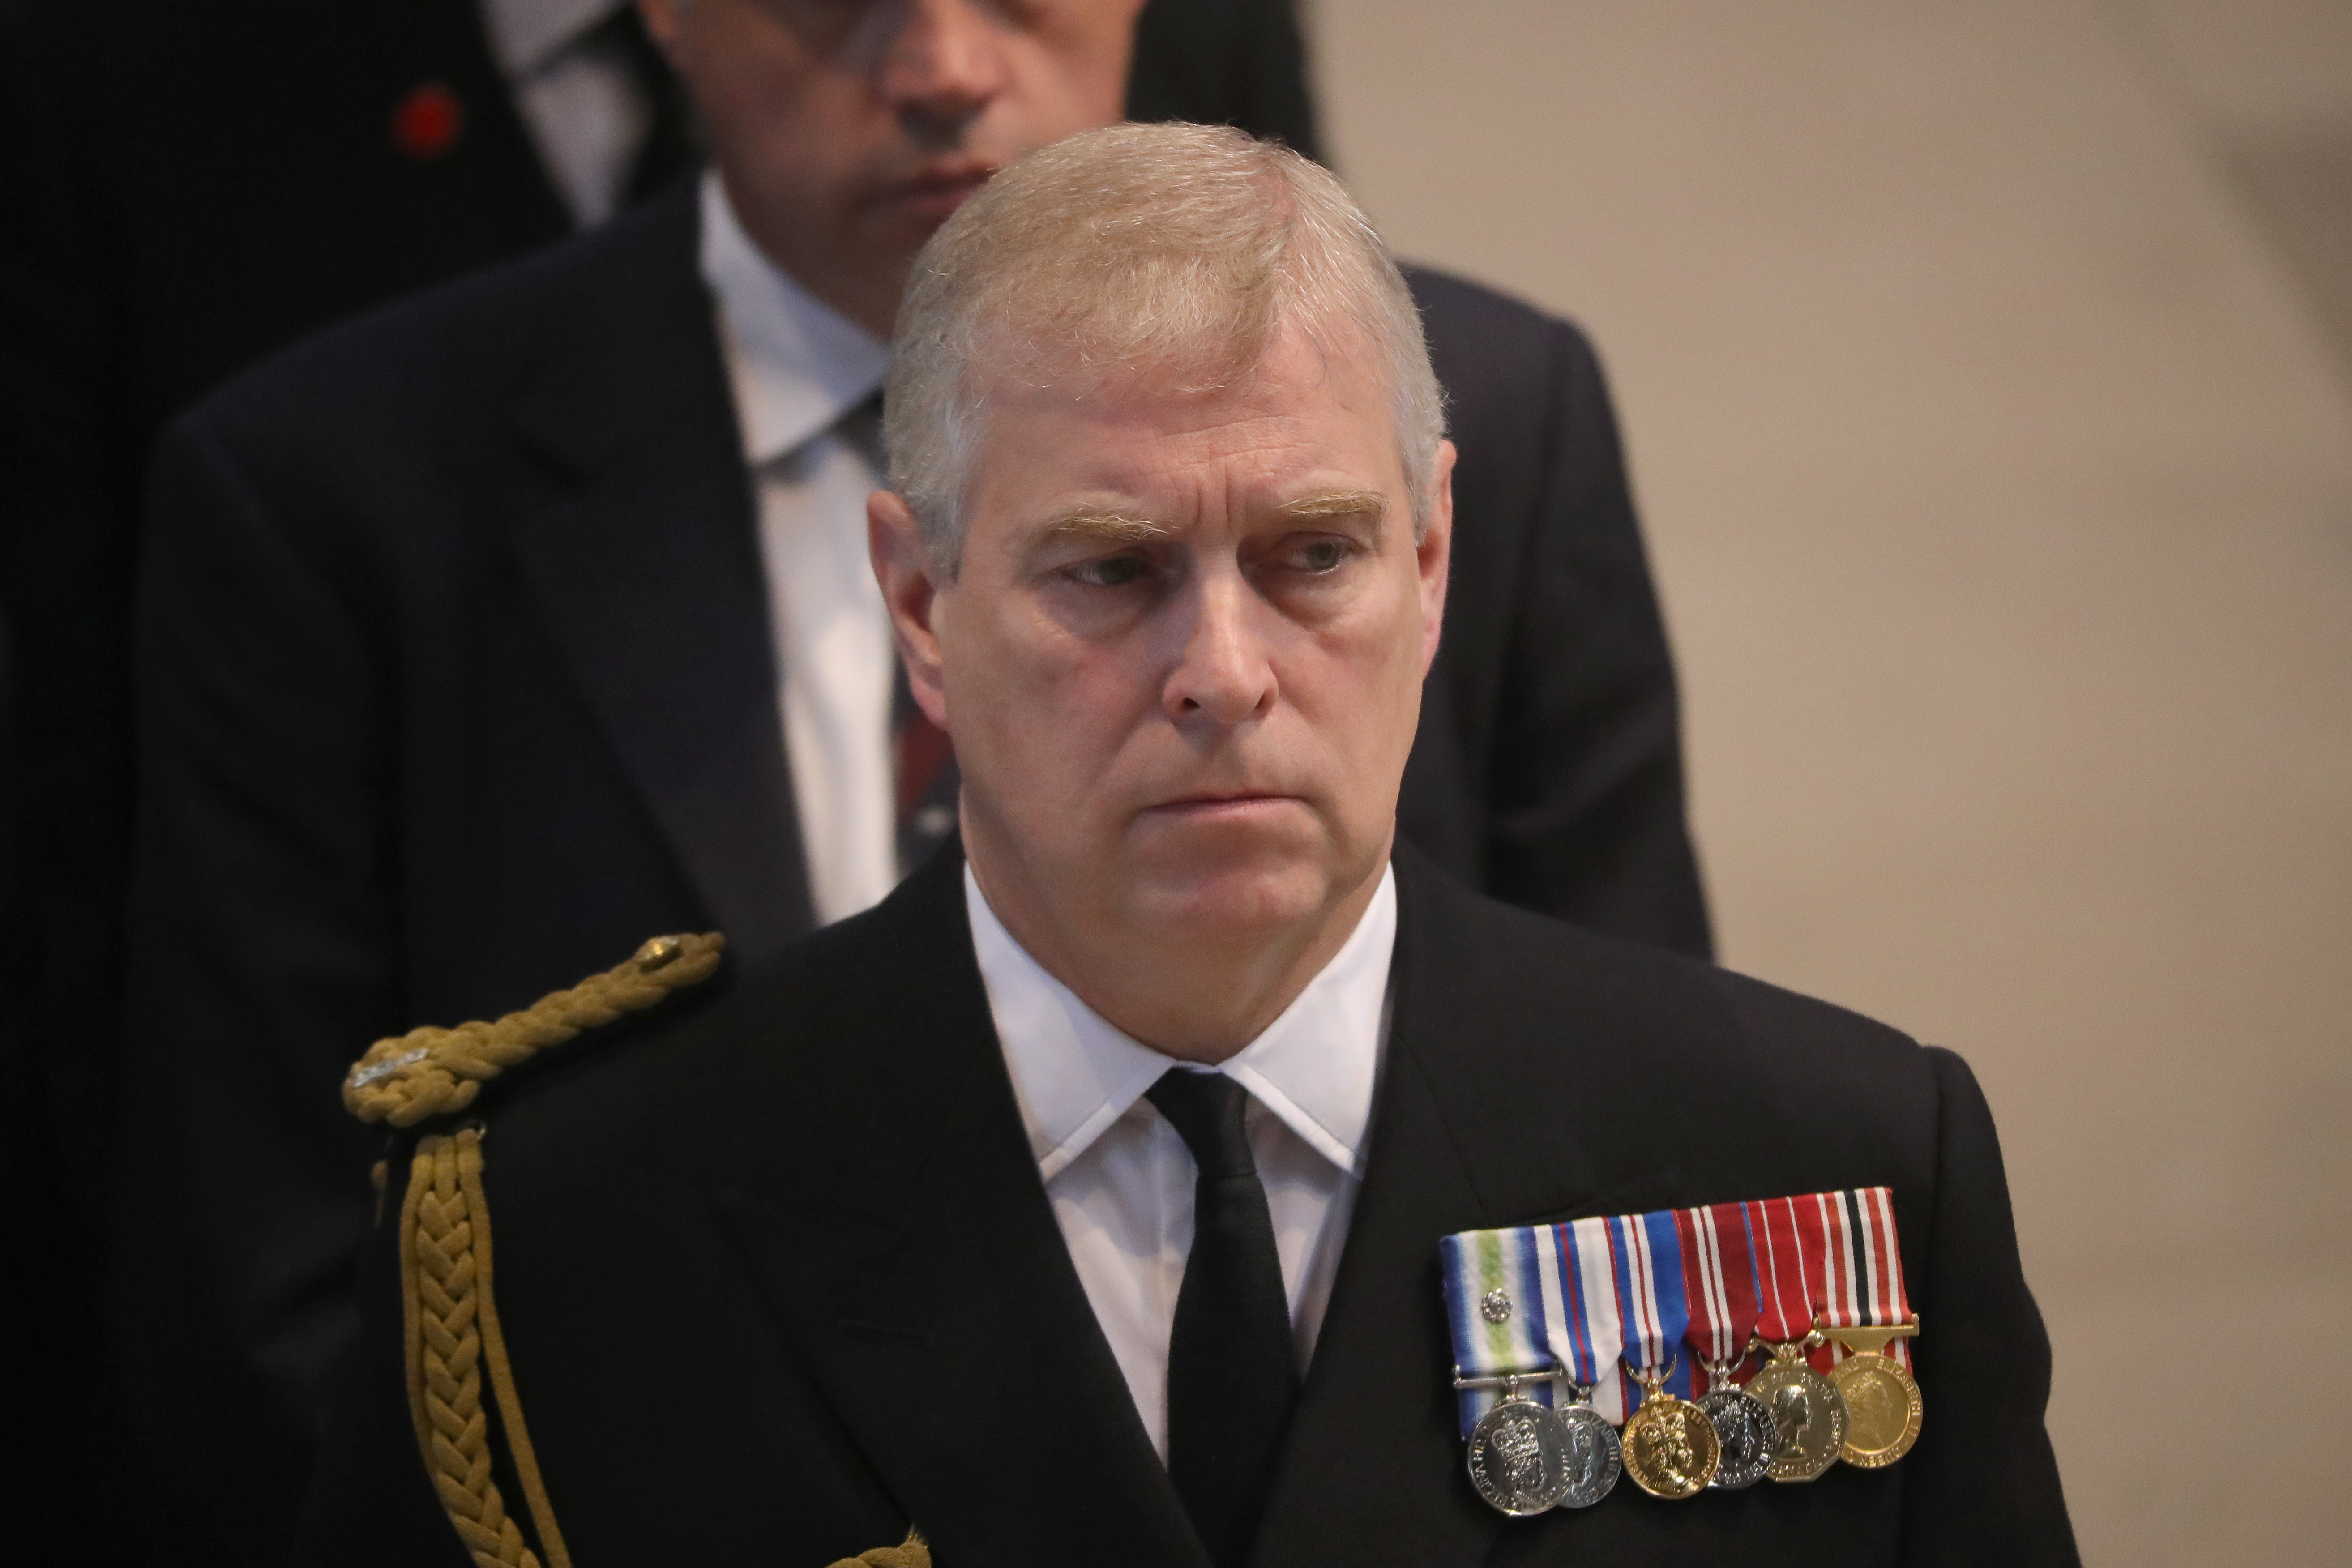 Prince Andrew, Duke of York, attends a commemoration service at Manchester Cathedral